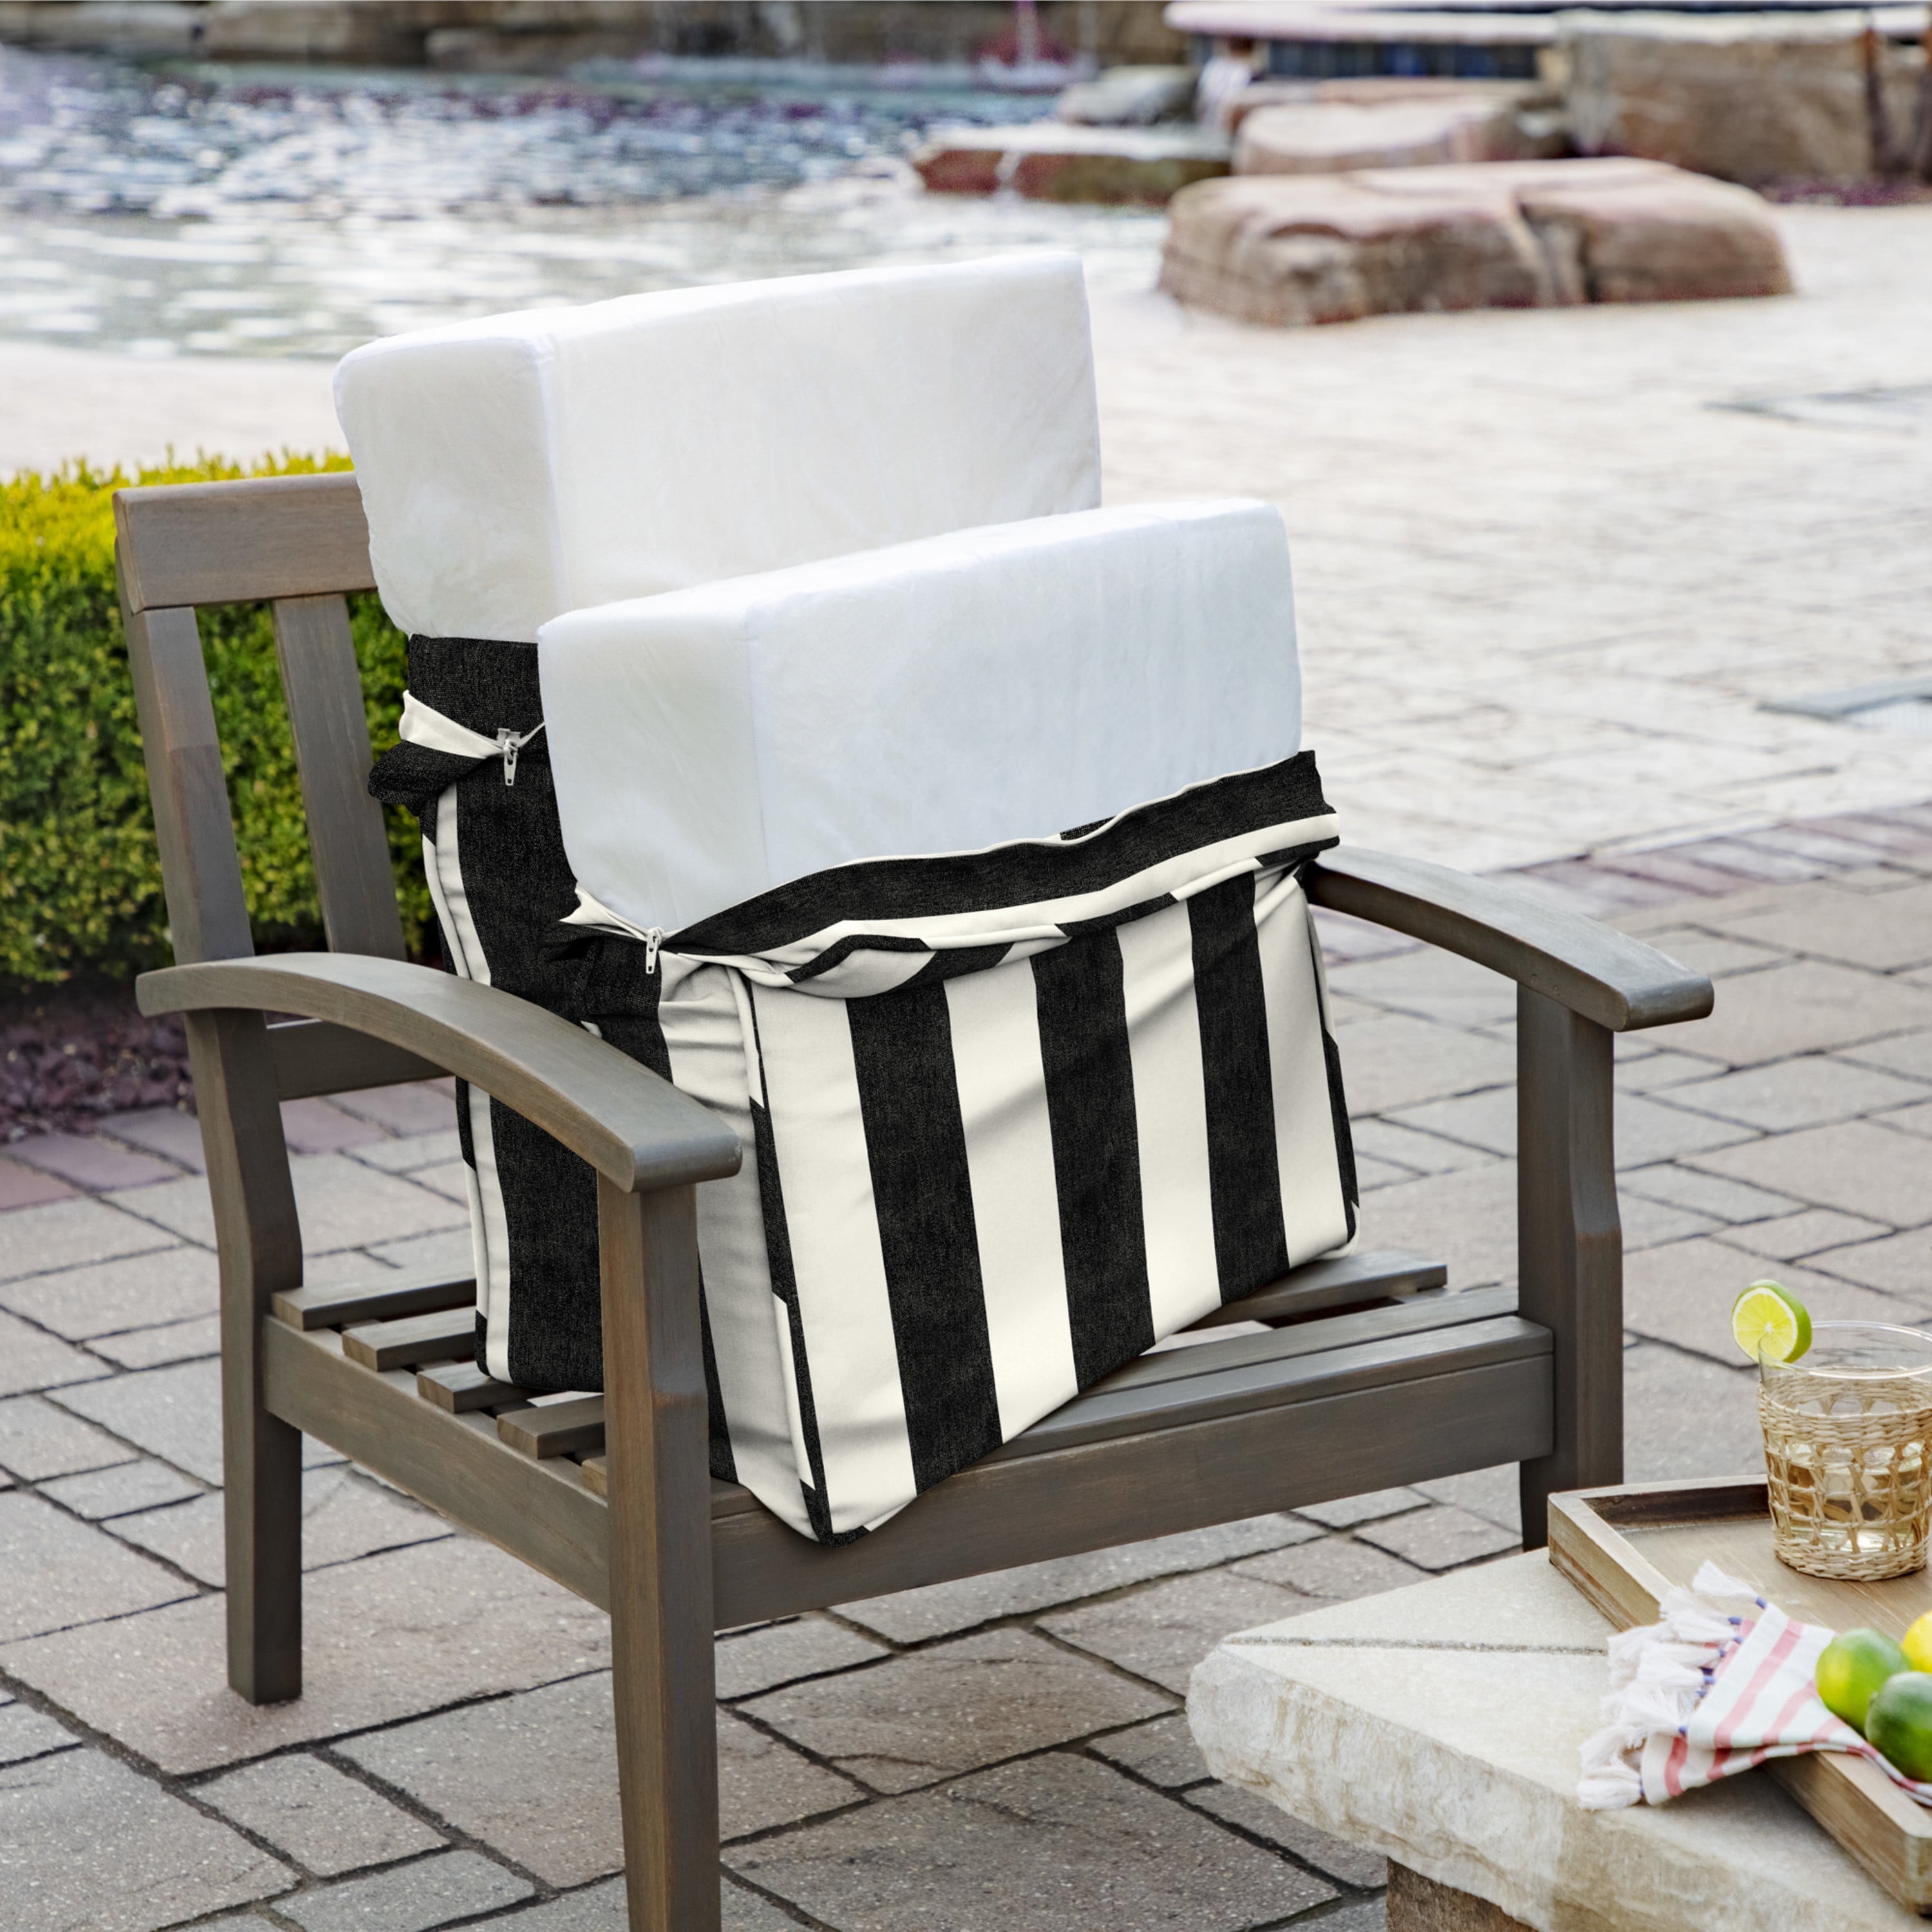 Arden Selections ProFoam 24 in. W. x 6 in. H. x 42 in. L. Acrylic Outdoor Deep Seat Cushion, Onyx Black Cabana